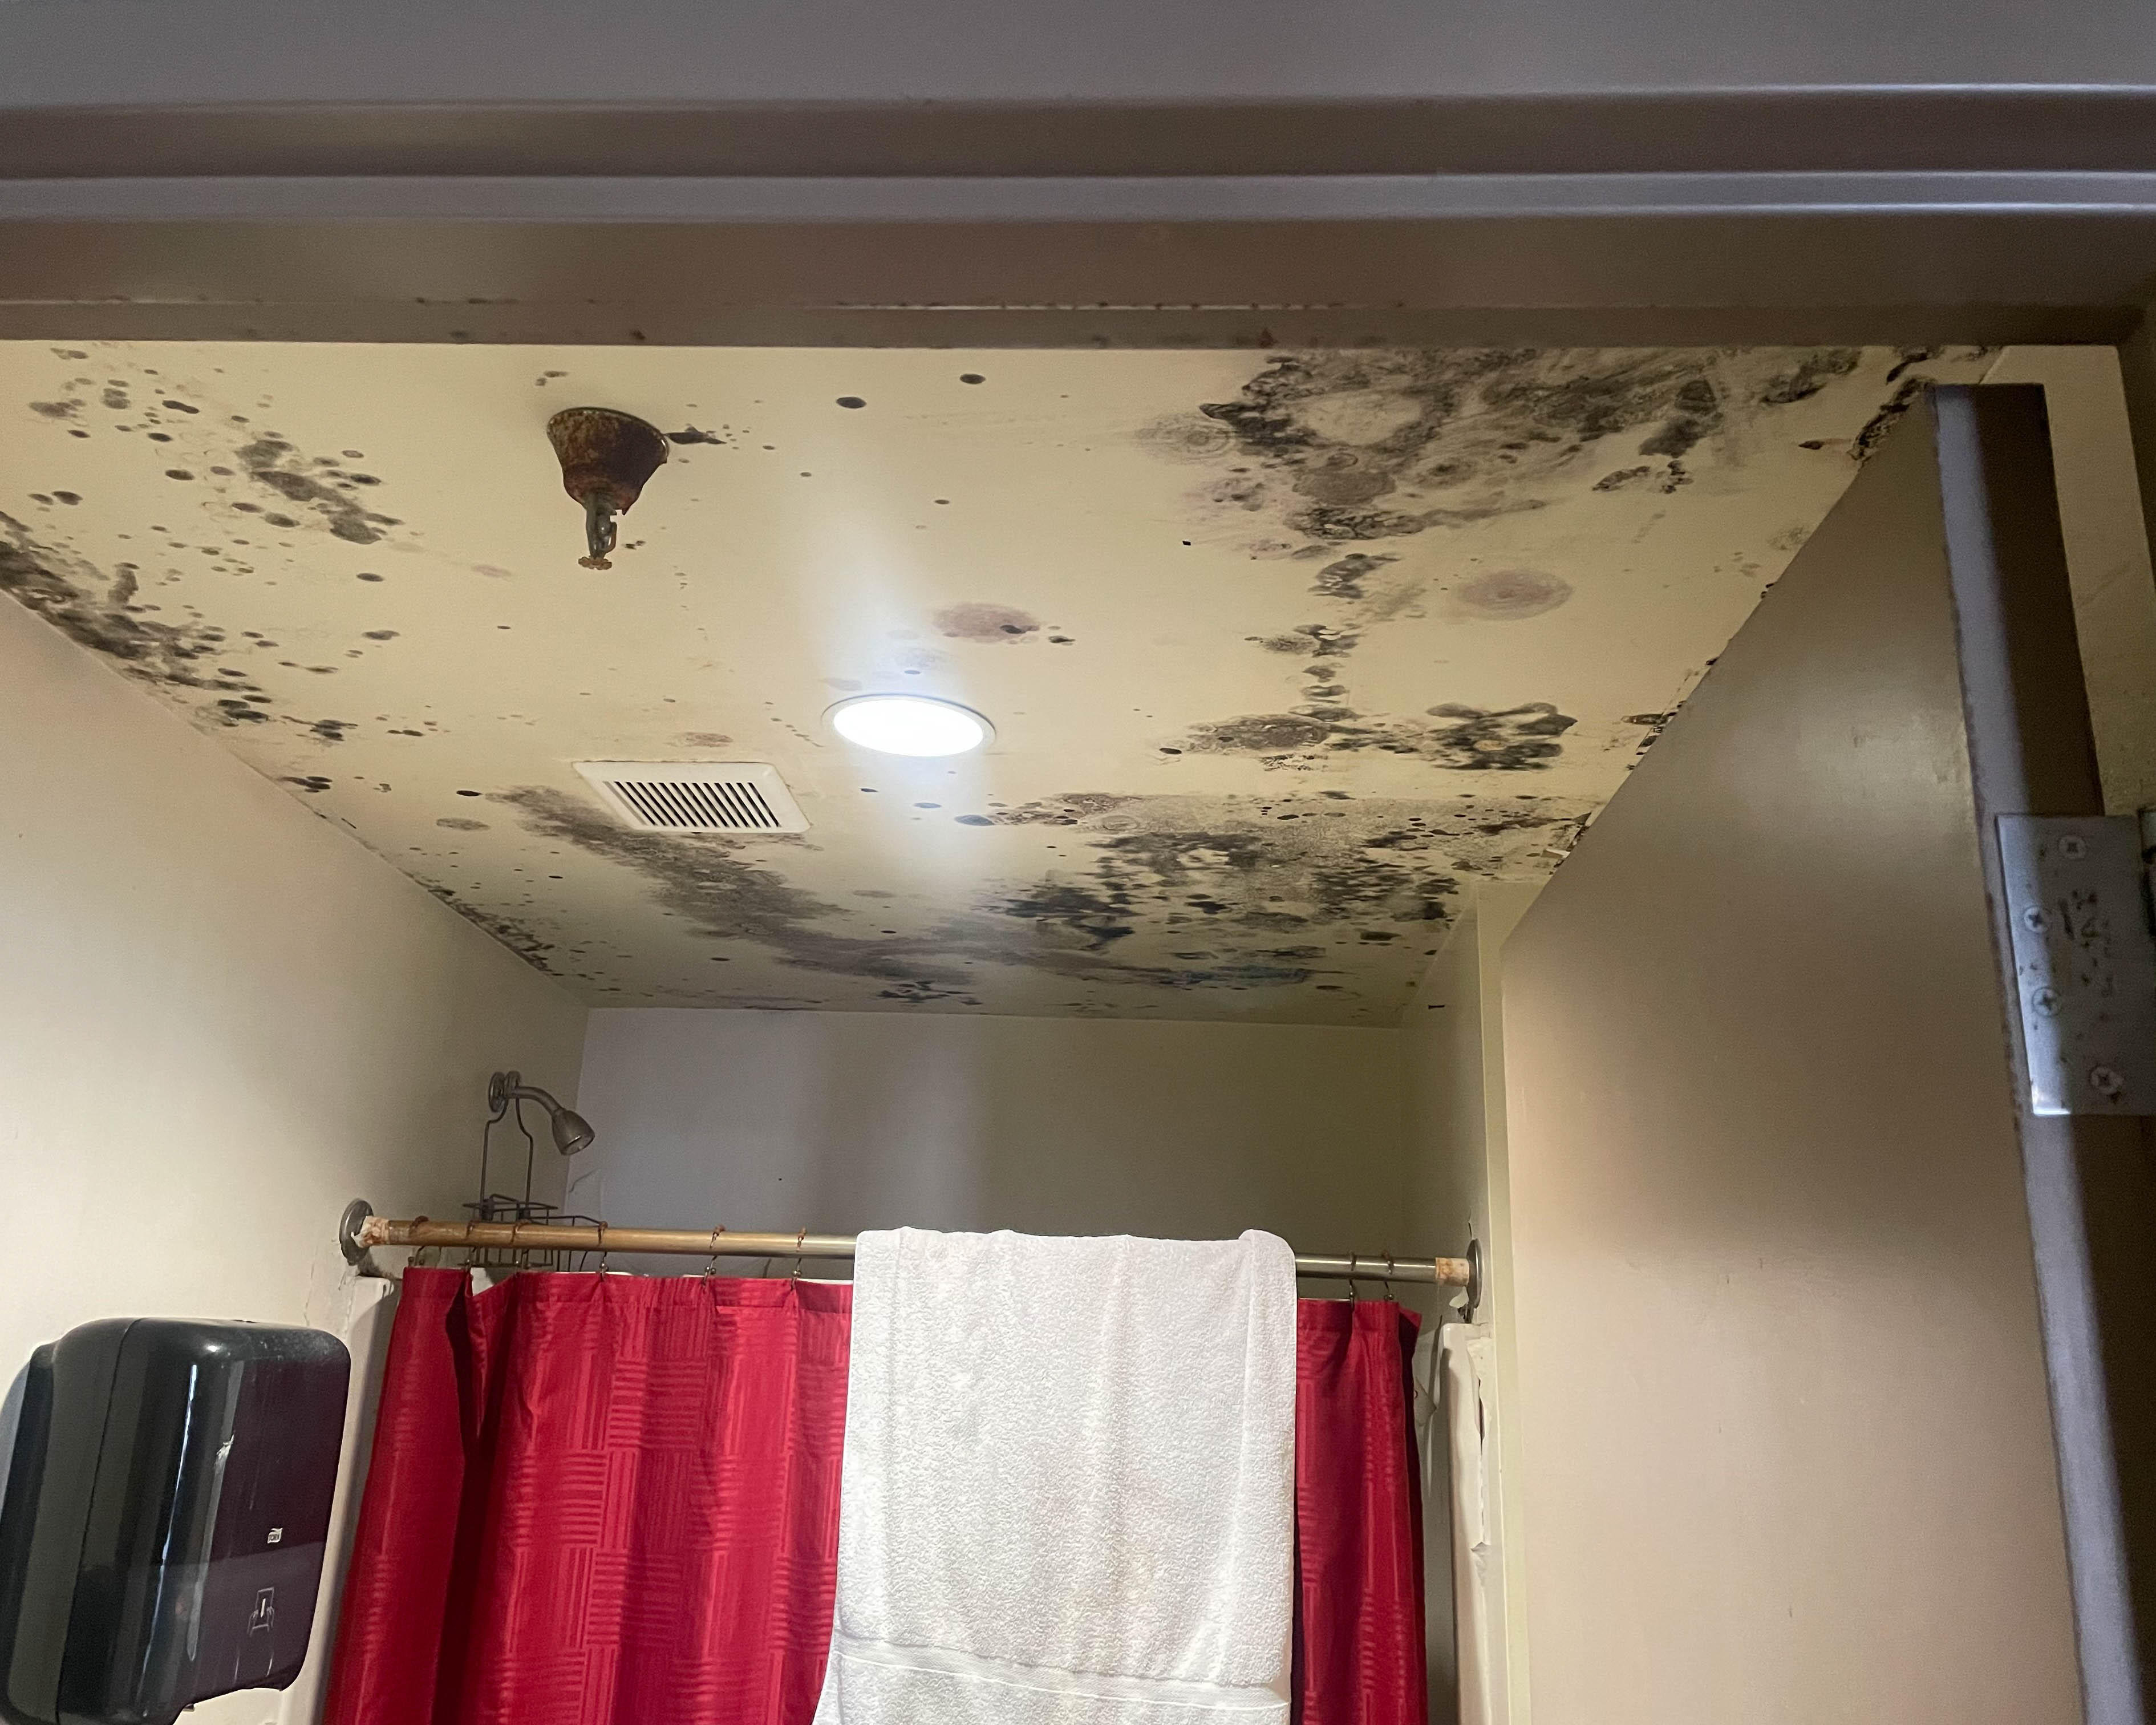 If a home or a business has recently suffered water damage, SERVPRO of West Knoxville can help prevent mold growth by performing a professional mold inspection. Give us a call!